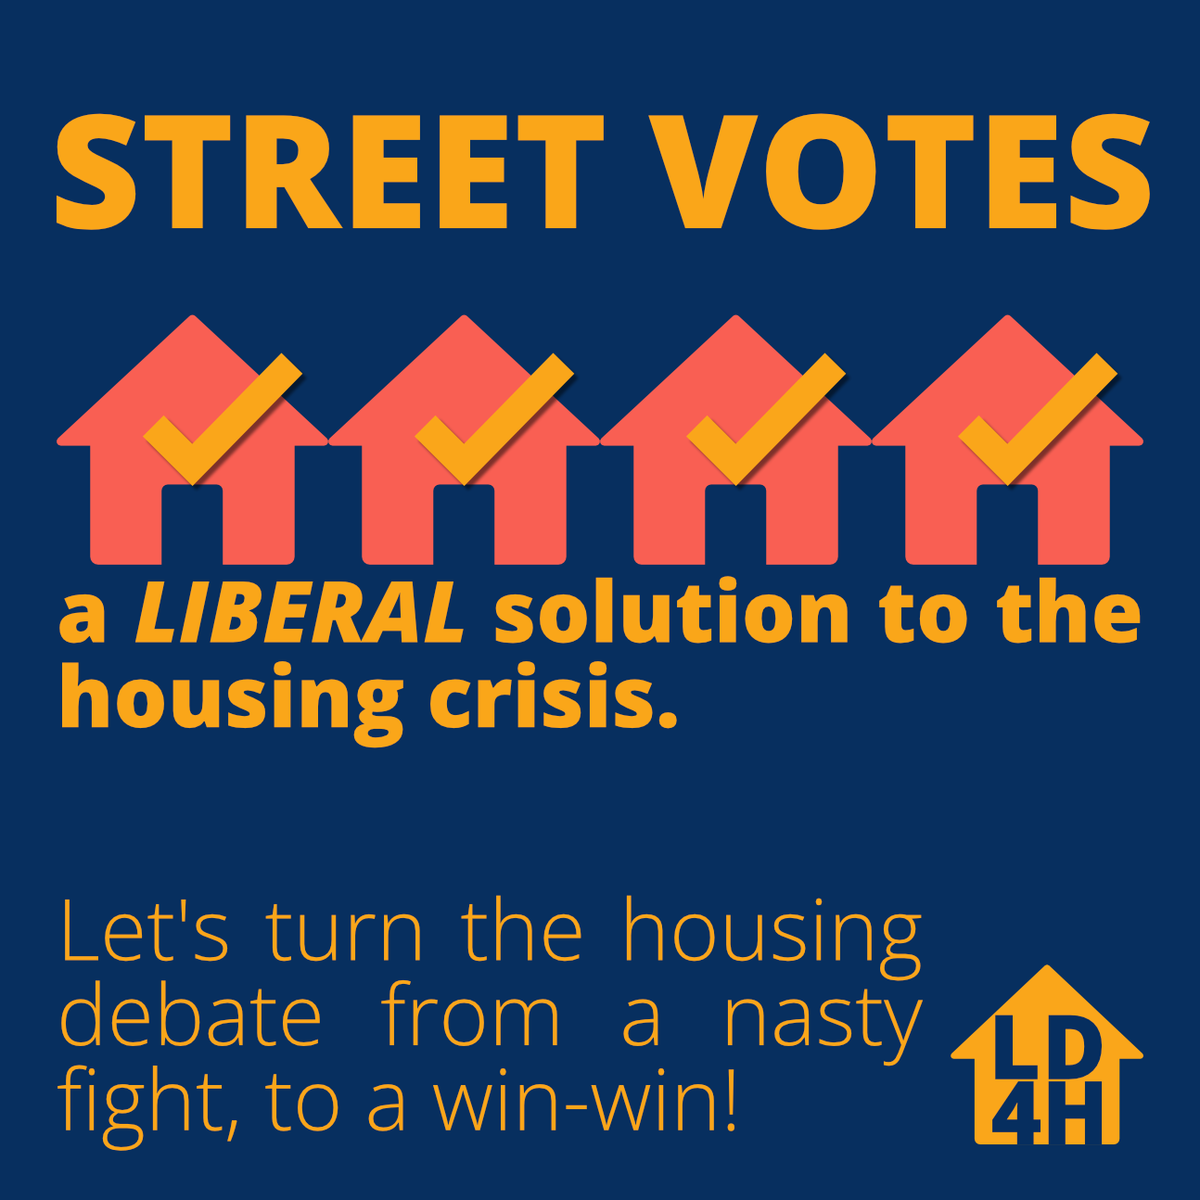 Street votes are a LIBERAL solution to the housing crisis! Find out more 👉 libhousing.com/street-votes/